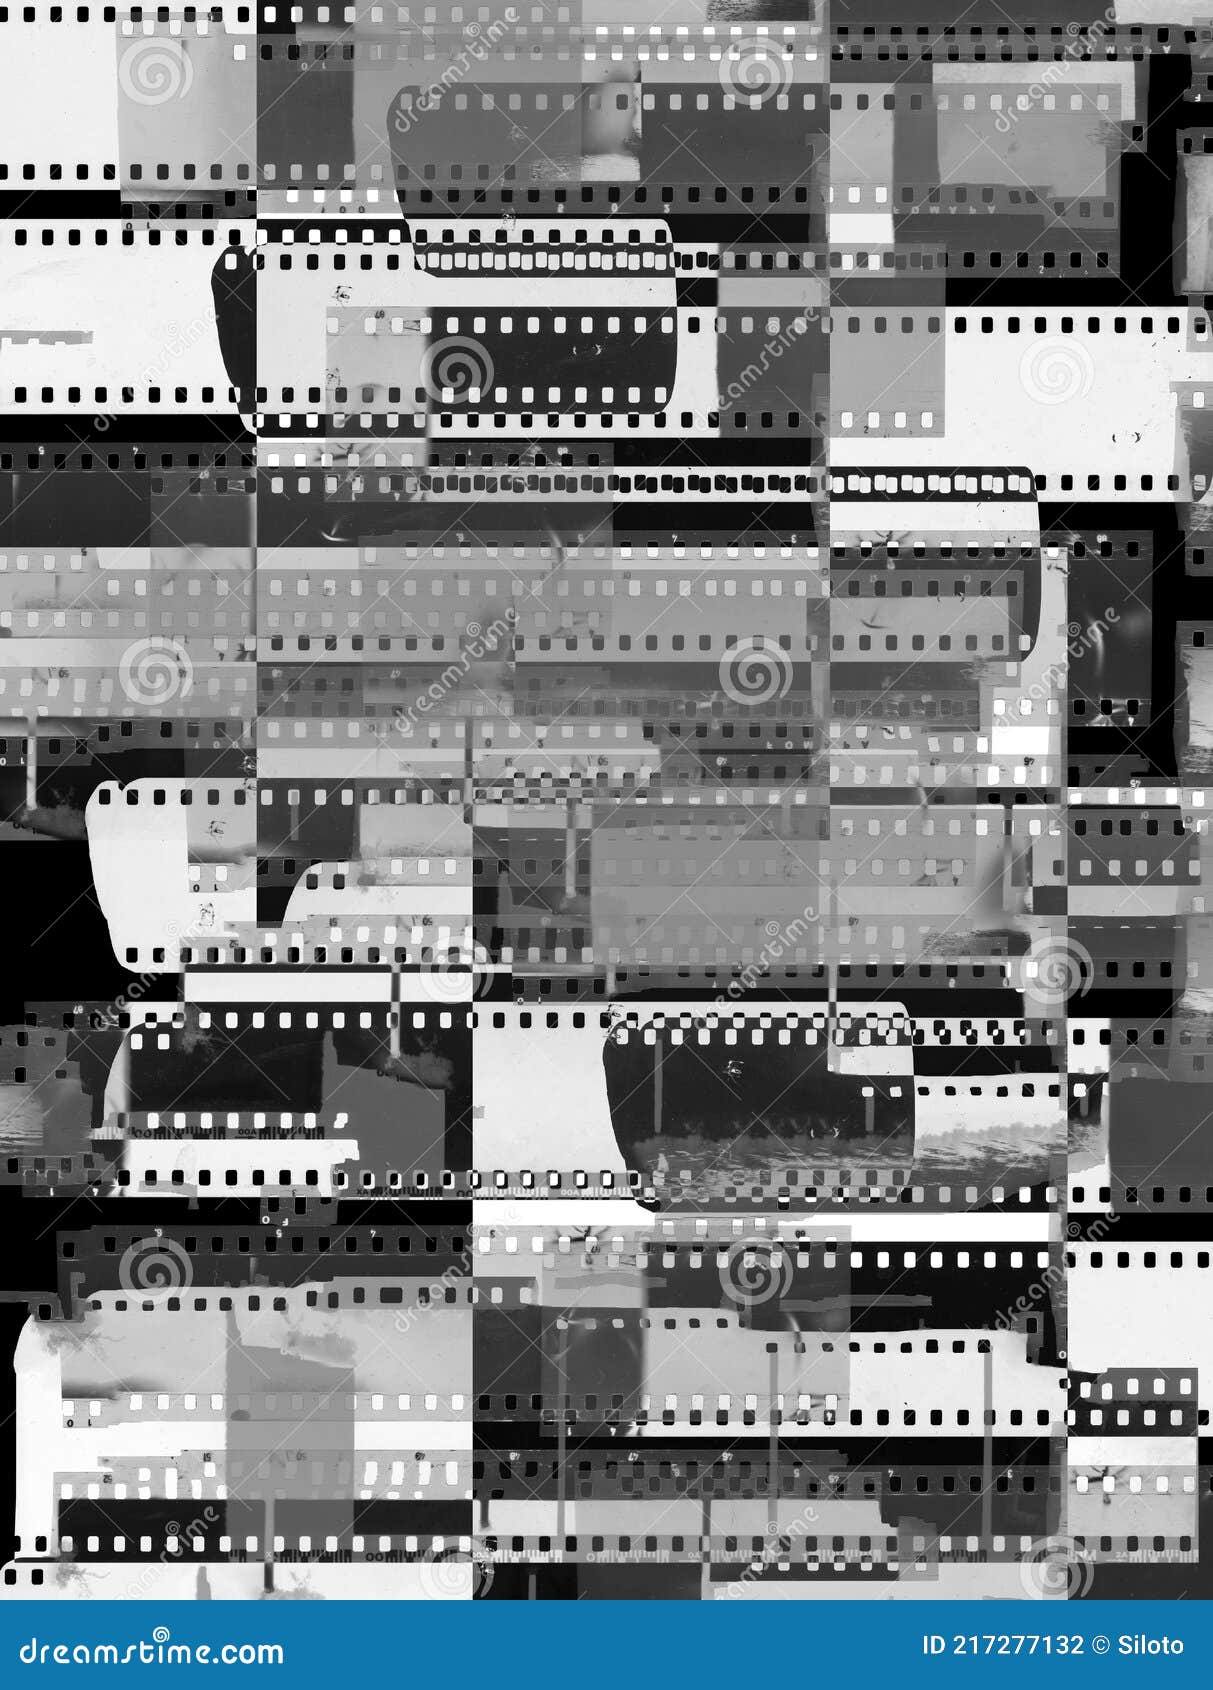 https://thumbs.dreamstime.com/z/abstract-collage-celluloid-film-strips-old-used-dusty-scratched-celluloid-film-strips-abstract-collage-celluloid-film-217277132.jpg